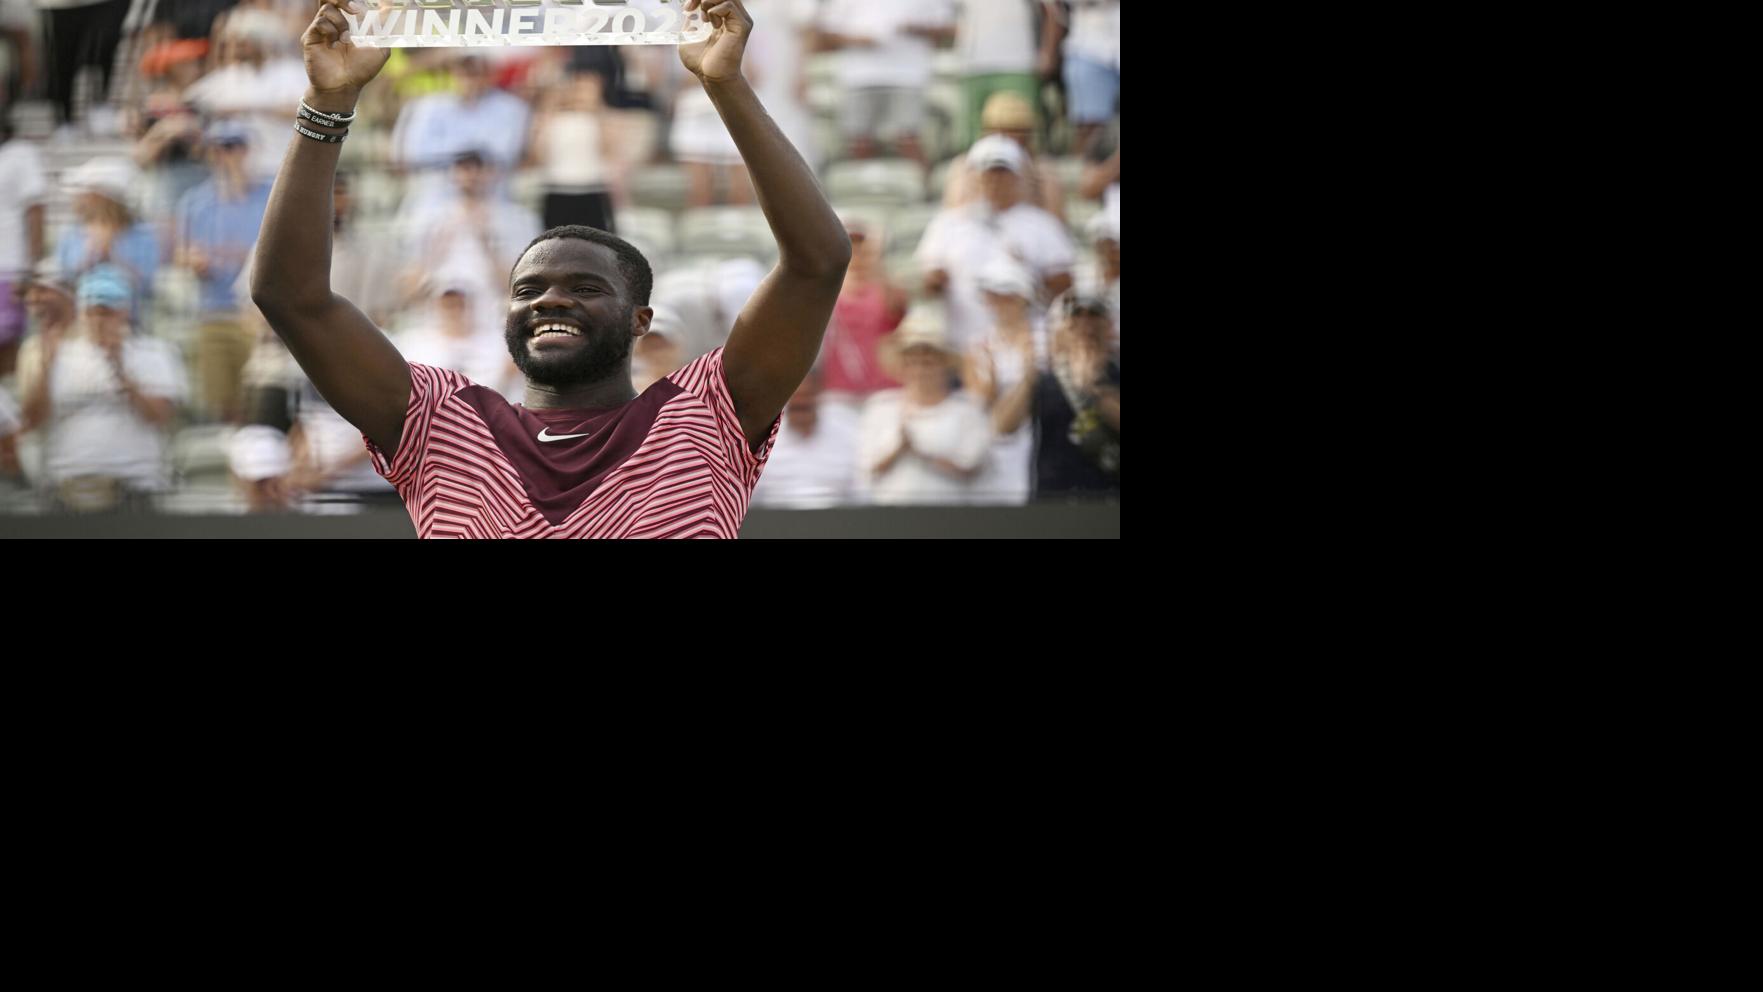 Tiafoe heads to Wimbledon with a career-high ranking and high hopes